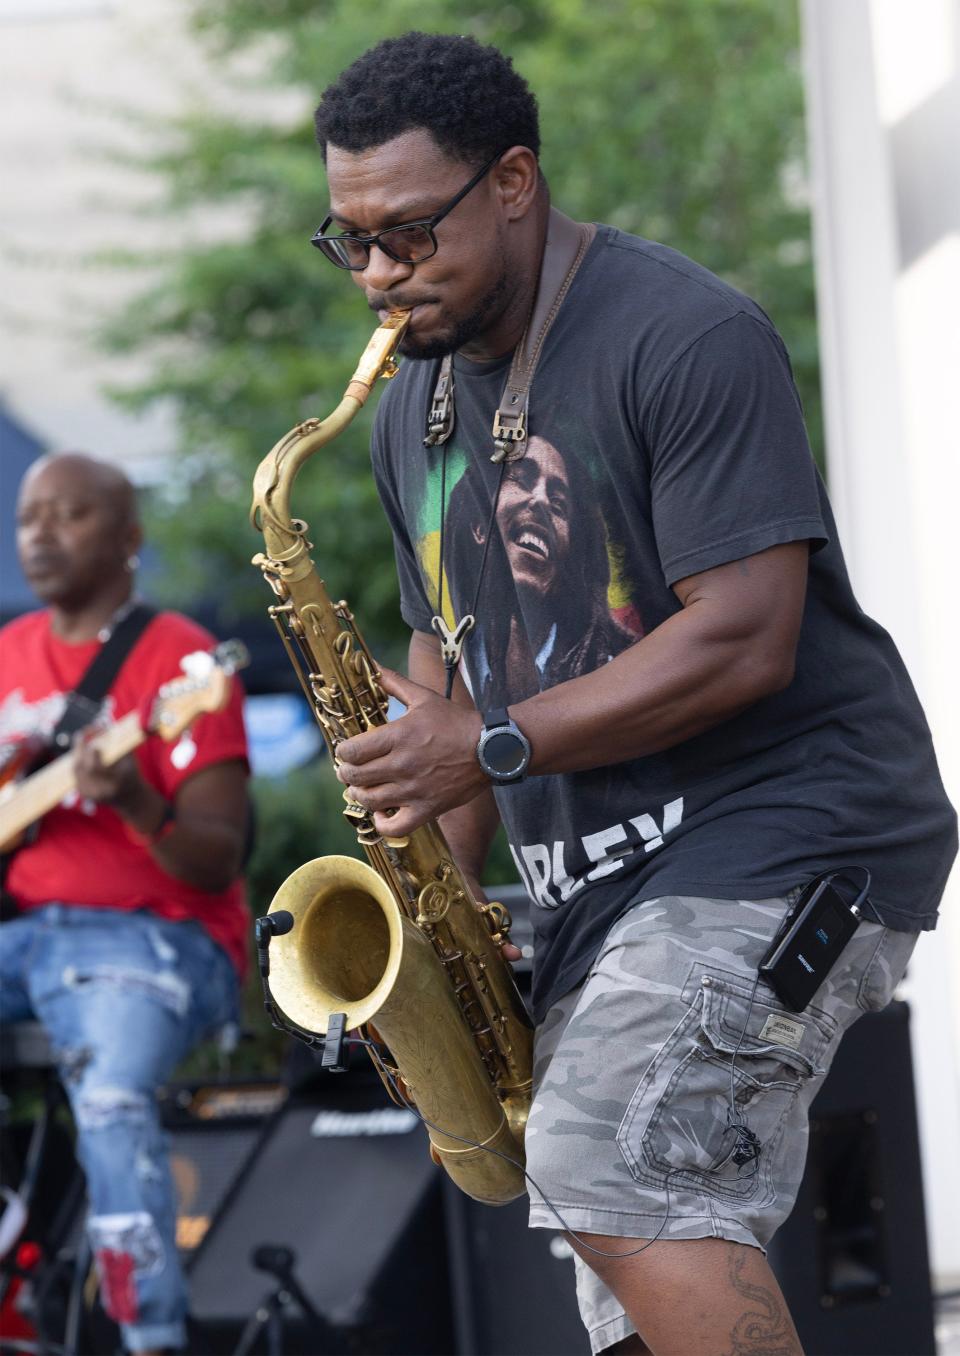 Michael Austin plays saxophone with the Robert Johnson Project at the Downtown Canton Music Fest.